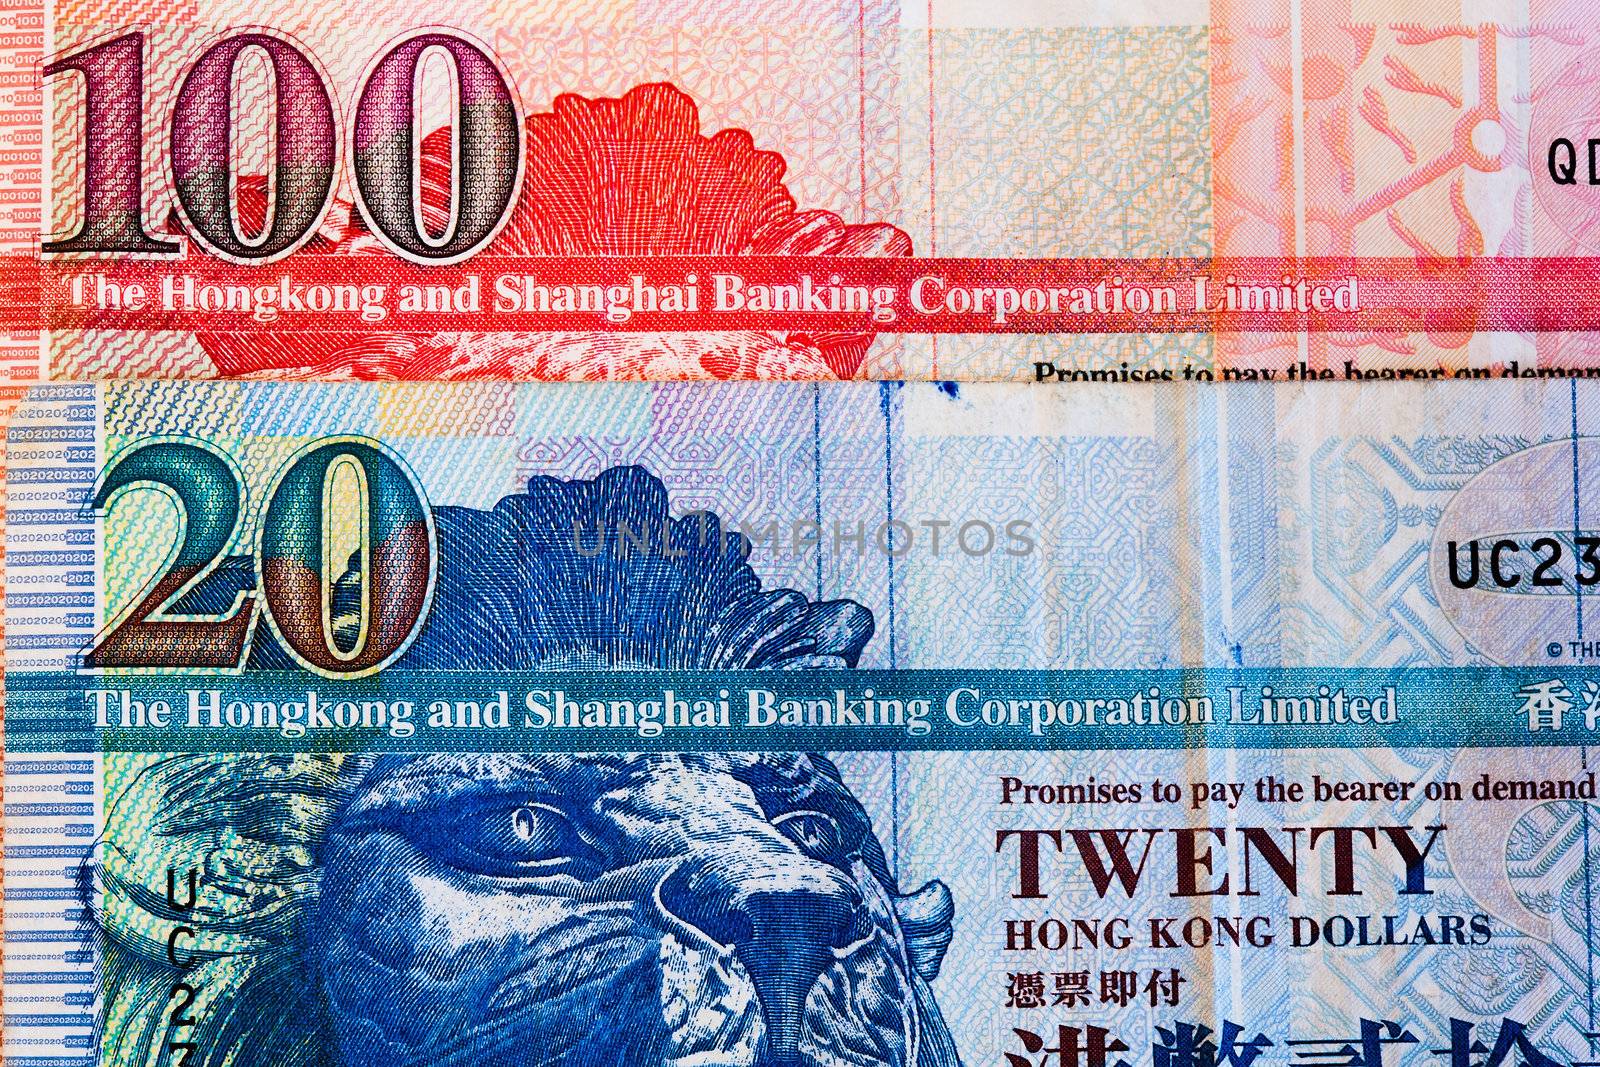 The Hong Kong currency